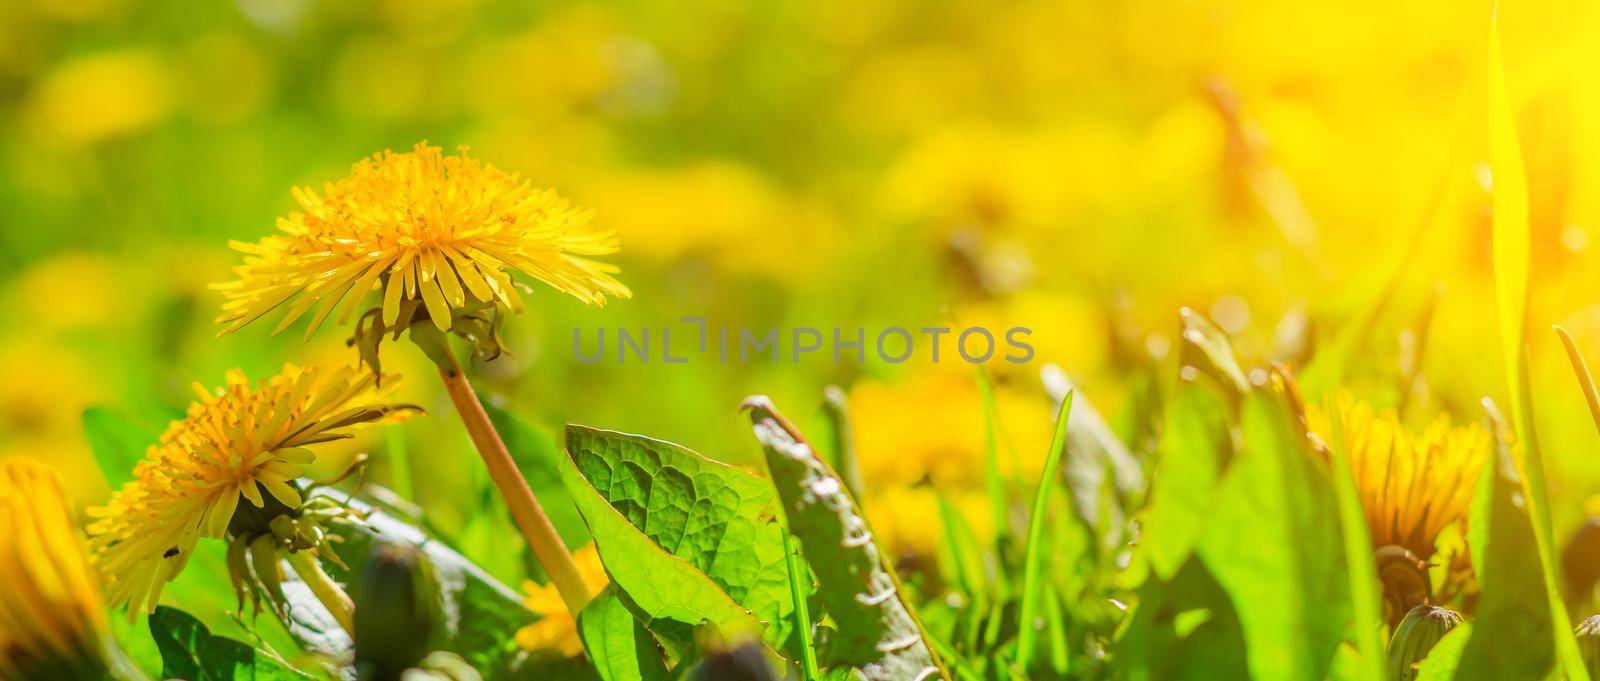 A field of dandelions. An article about summer flowers. Beautiful yellow flowers background with light. Bright summer sunny flowers. by alenka2194